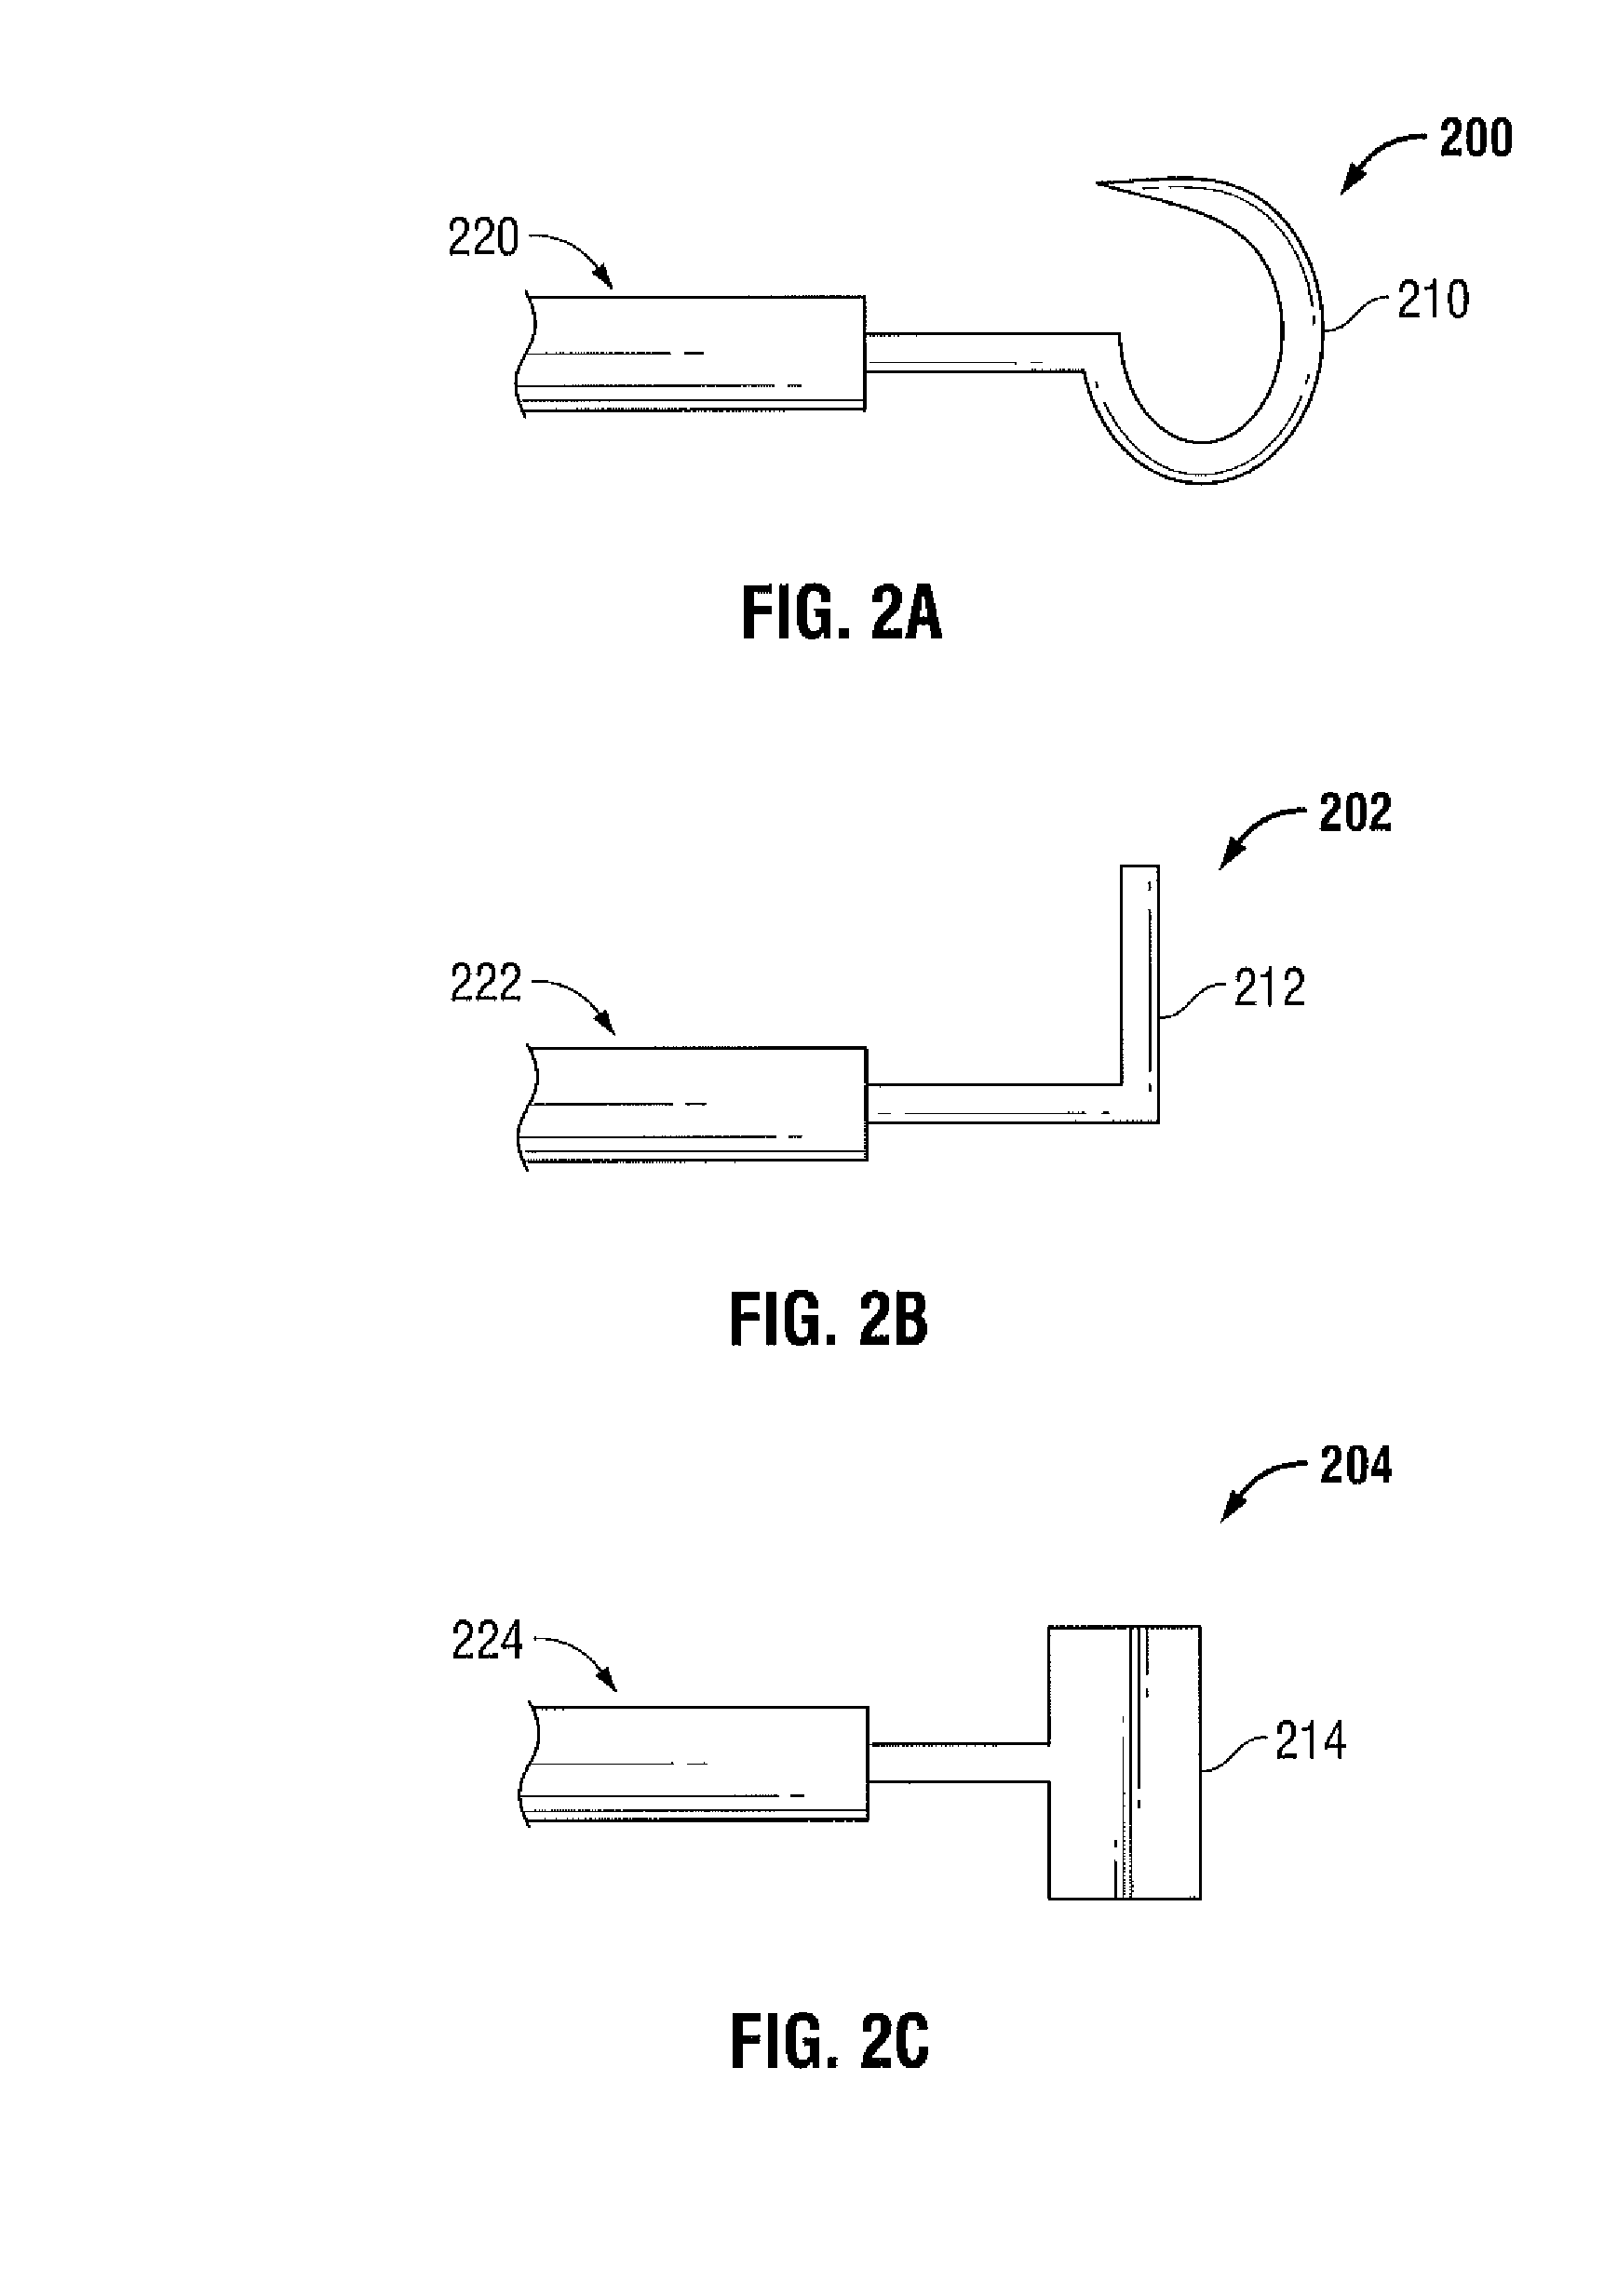 Electrosurgical Instrument Having a Coated Electrode Utilizing an Atomic Layer Deposition Technique